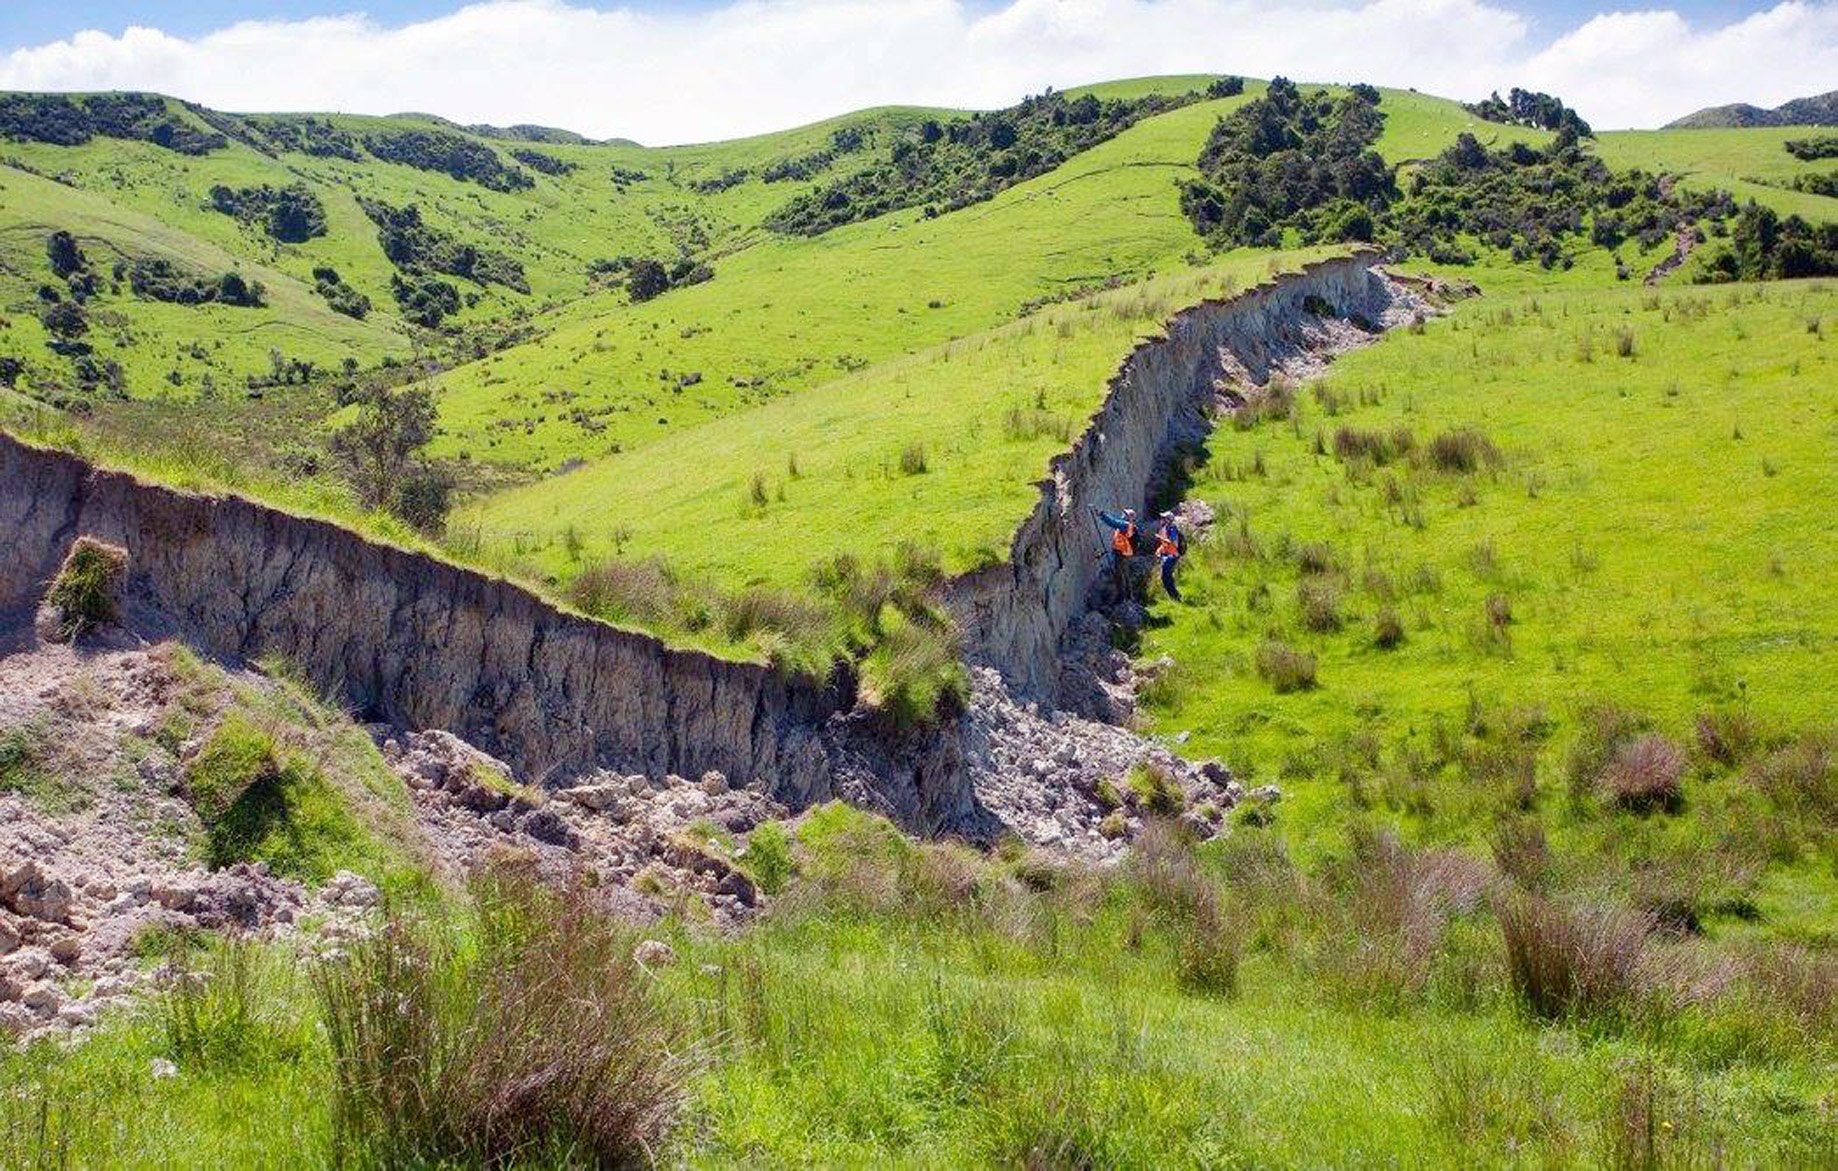 Faultline damage could be traced out of Kaikoura. Photo: Dr Kate Pedley (University of Canterbury).